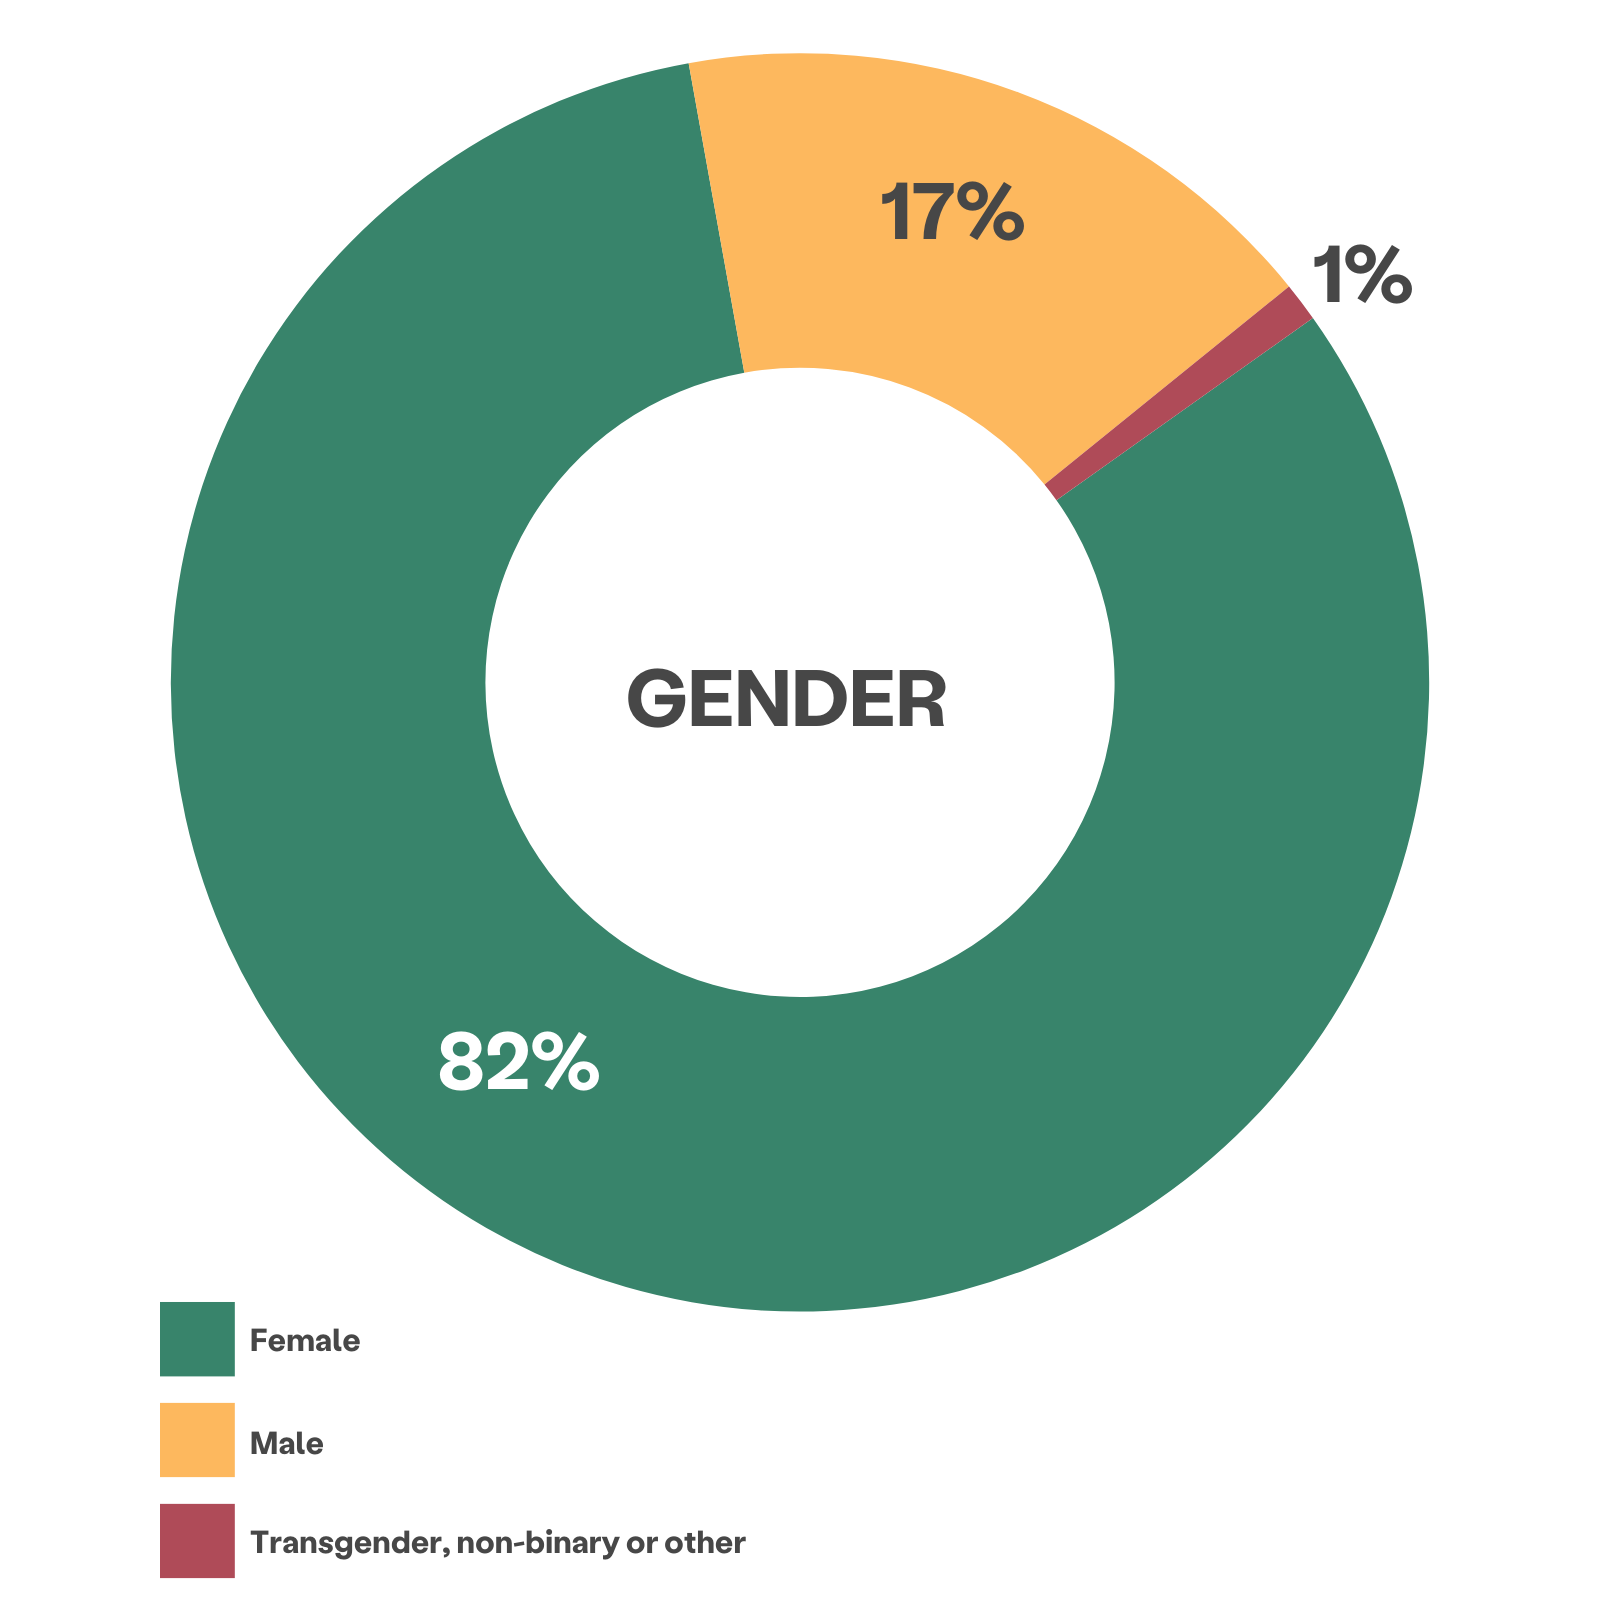 multicolor wheel chart showing client gender: 82% female, 17% male, 1% transgender, non-binary or other